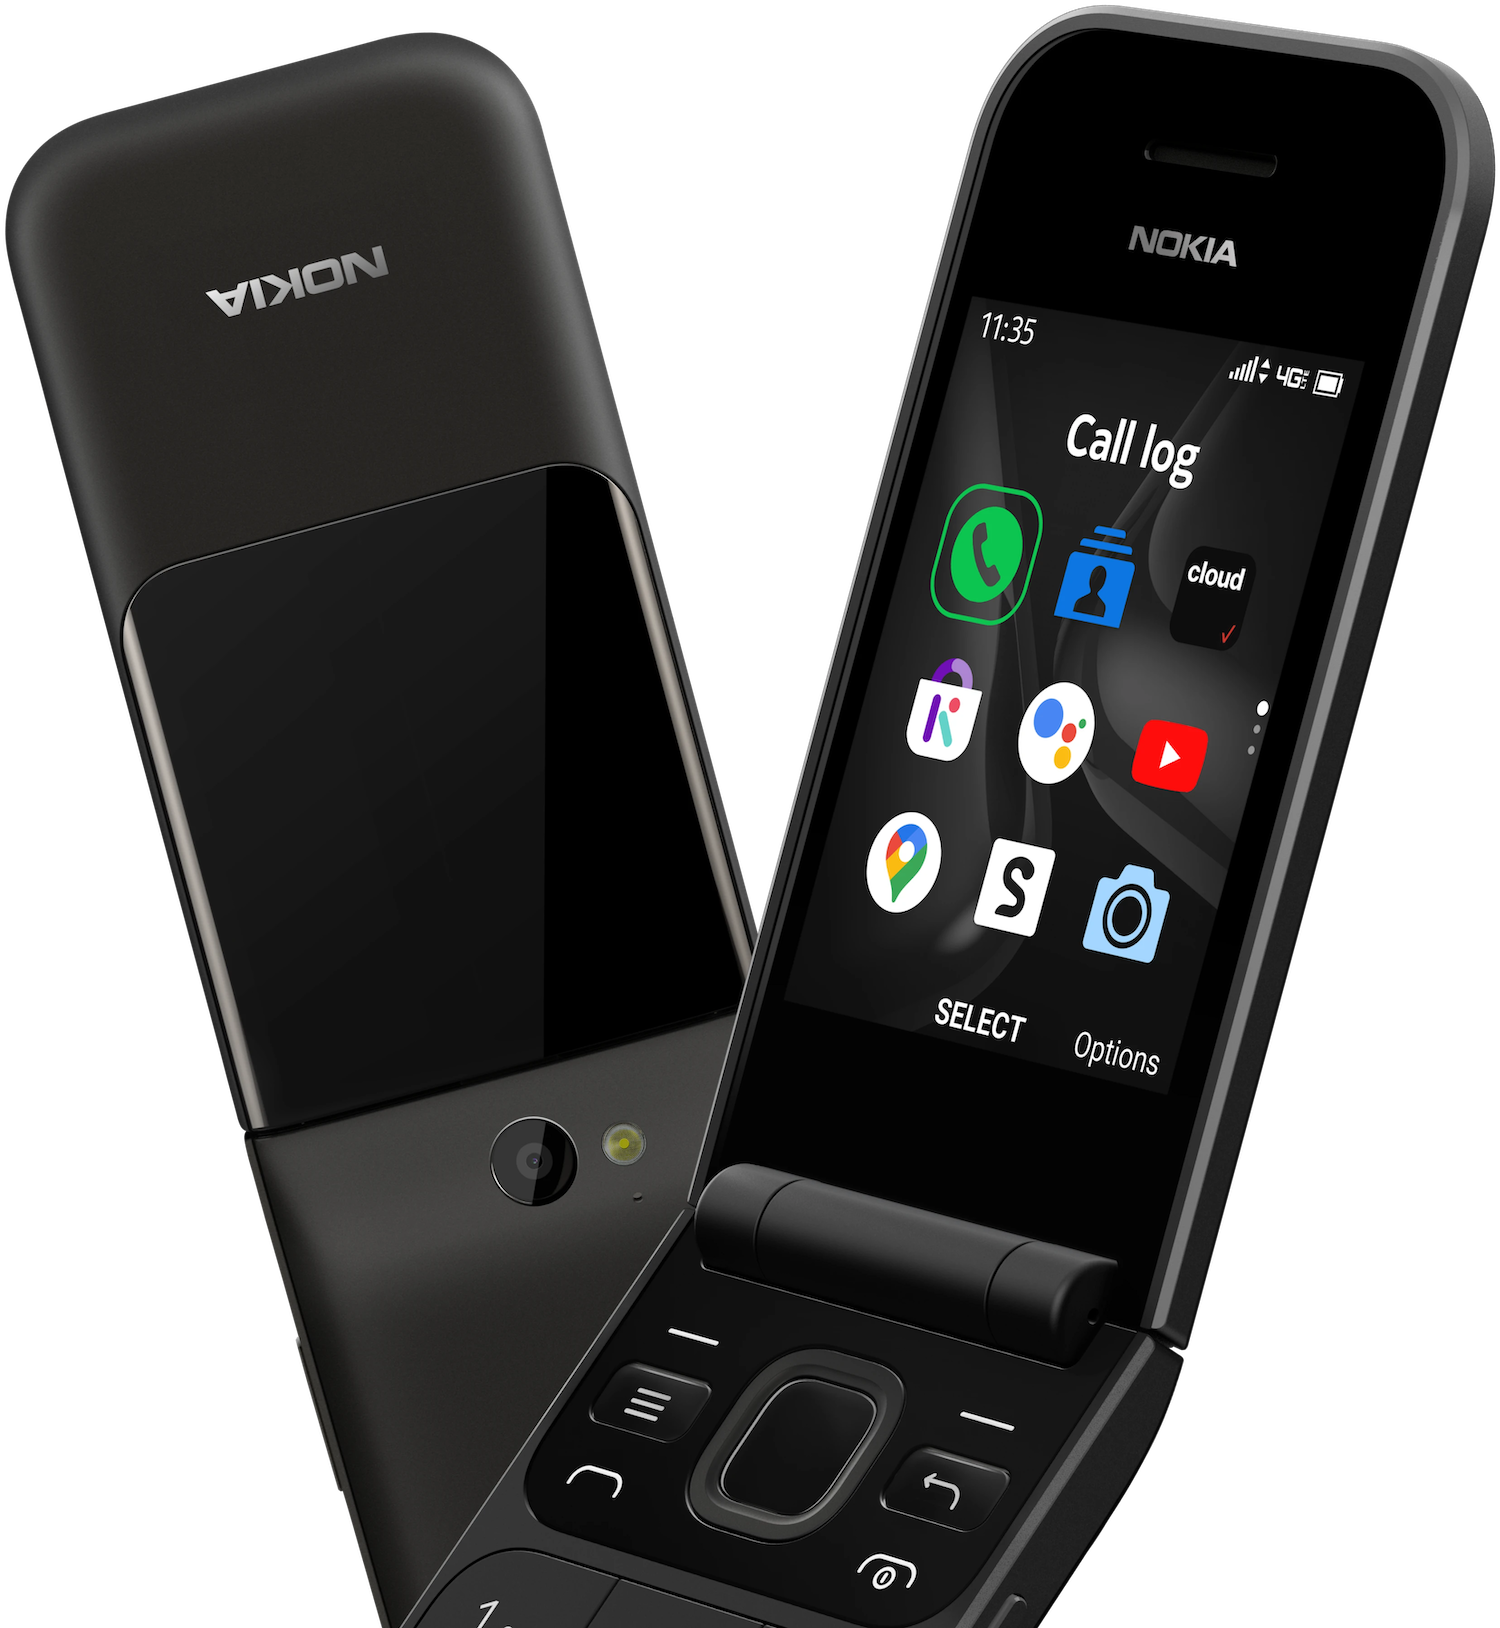 Nokia 2720 V Flip phone coming to US with Google Assistant 9to5Google